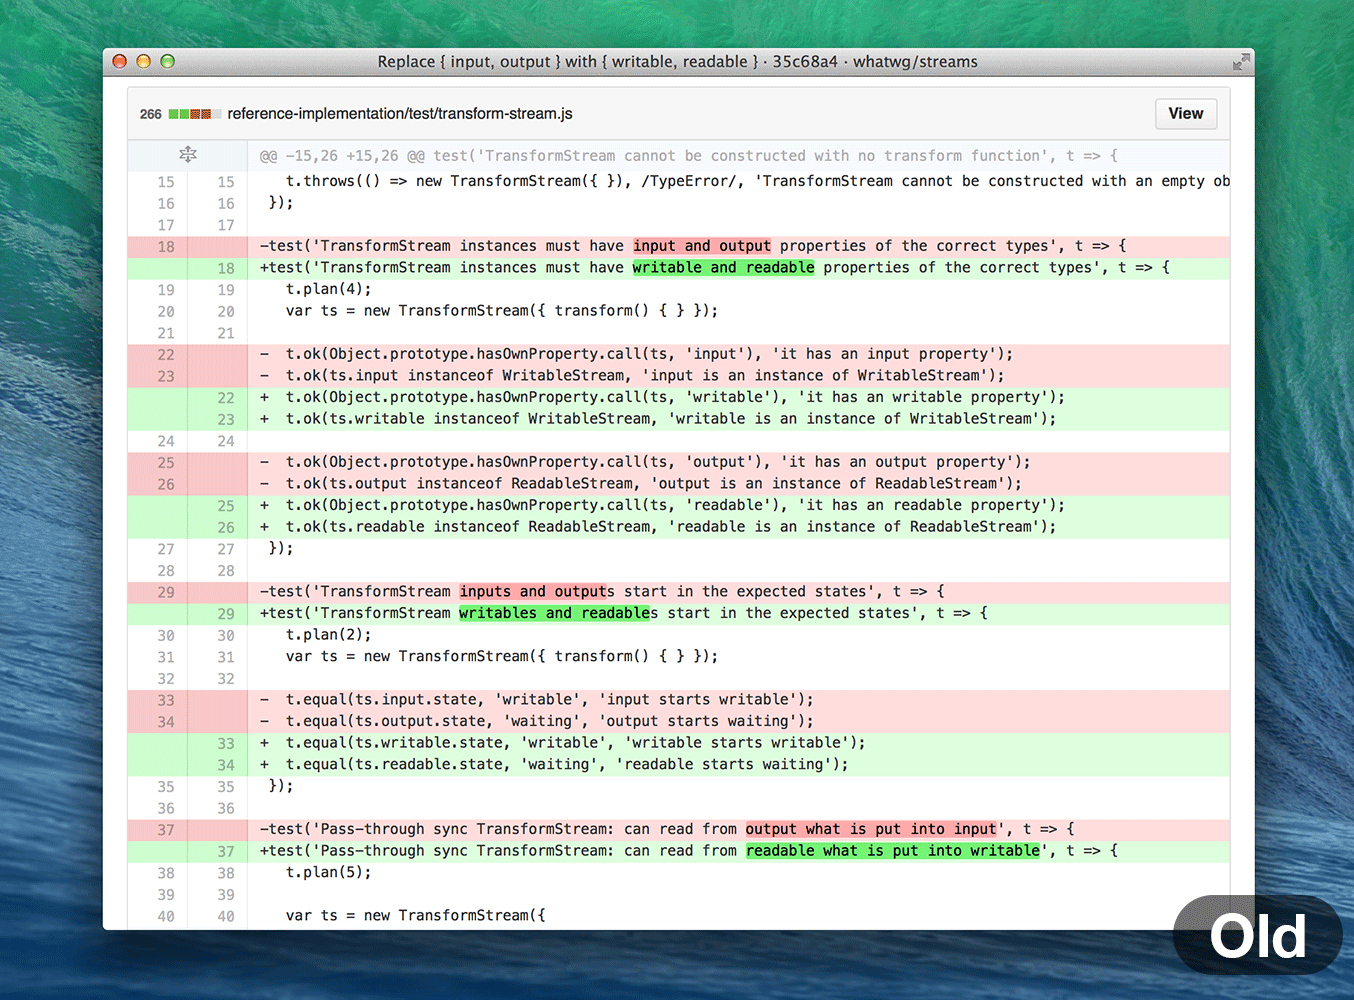 Old and new highlighting behaviors